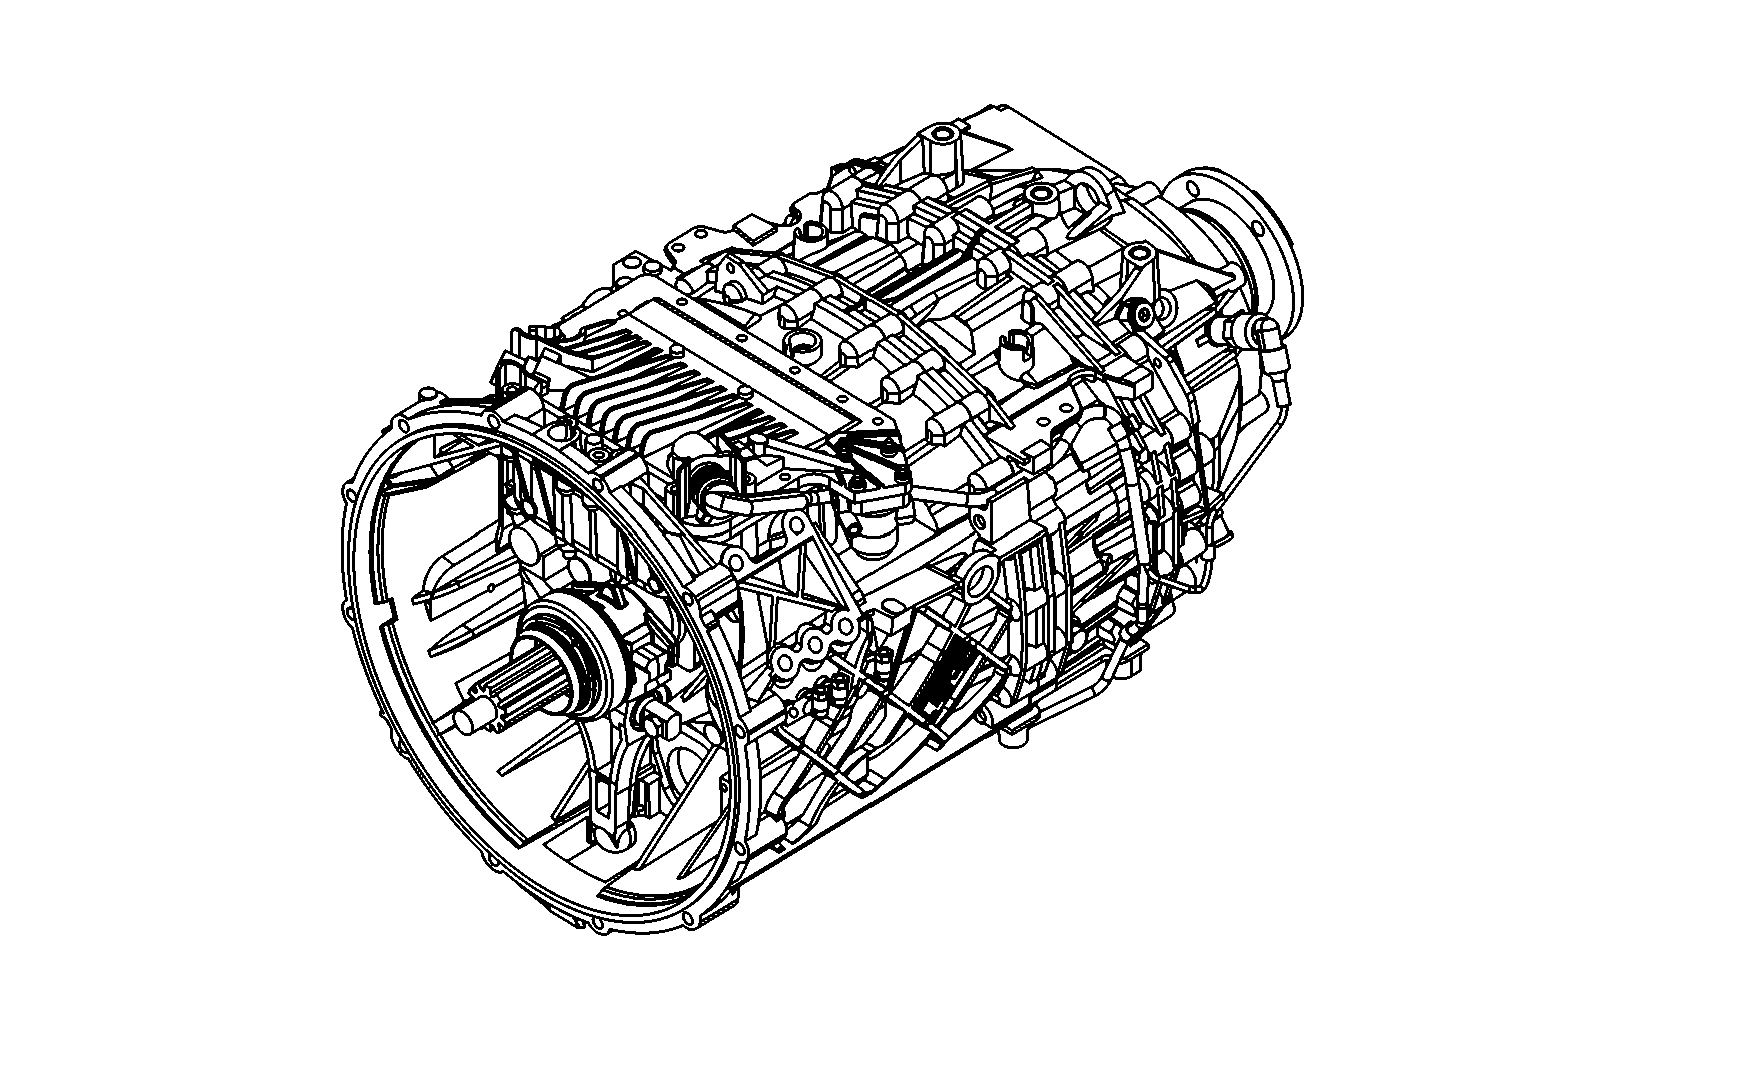 drawing for MOTORCOACH SYSTEM 13L-1-265A - 10 AS 2310 B (figure 1)